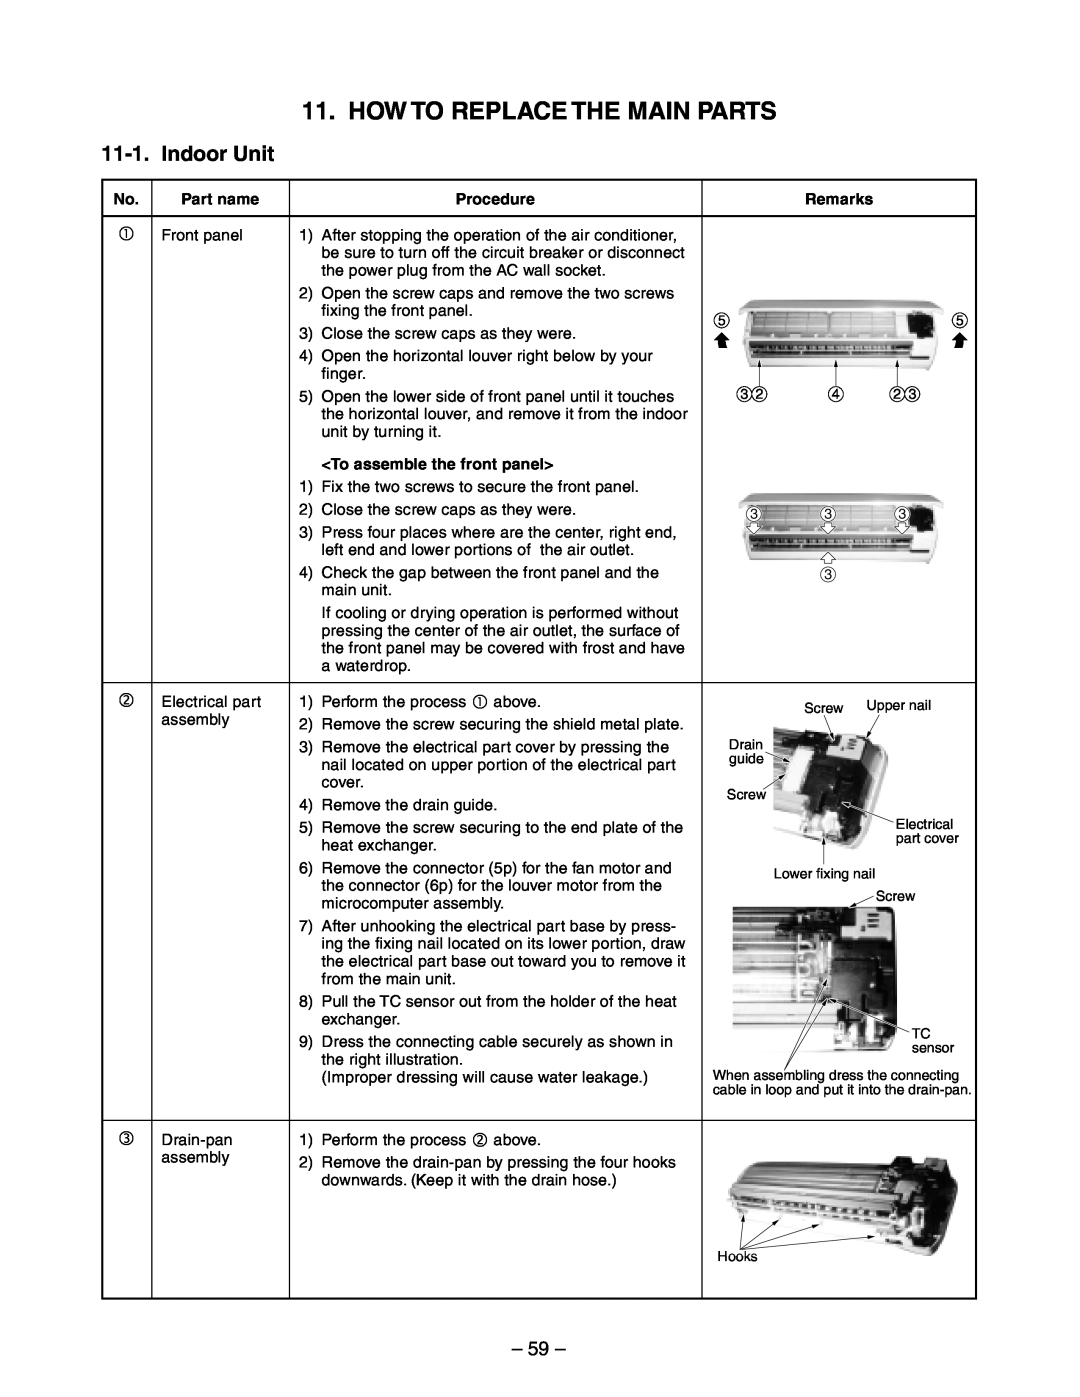 Toshiba RAS-13YAV-E, RAS-13YKV-E, RAS-10YKV-E, RAS-10YAV-E service manual How To Replace The Main Parts, 11-1, Indoor Unit 